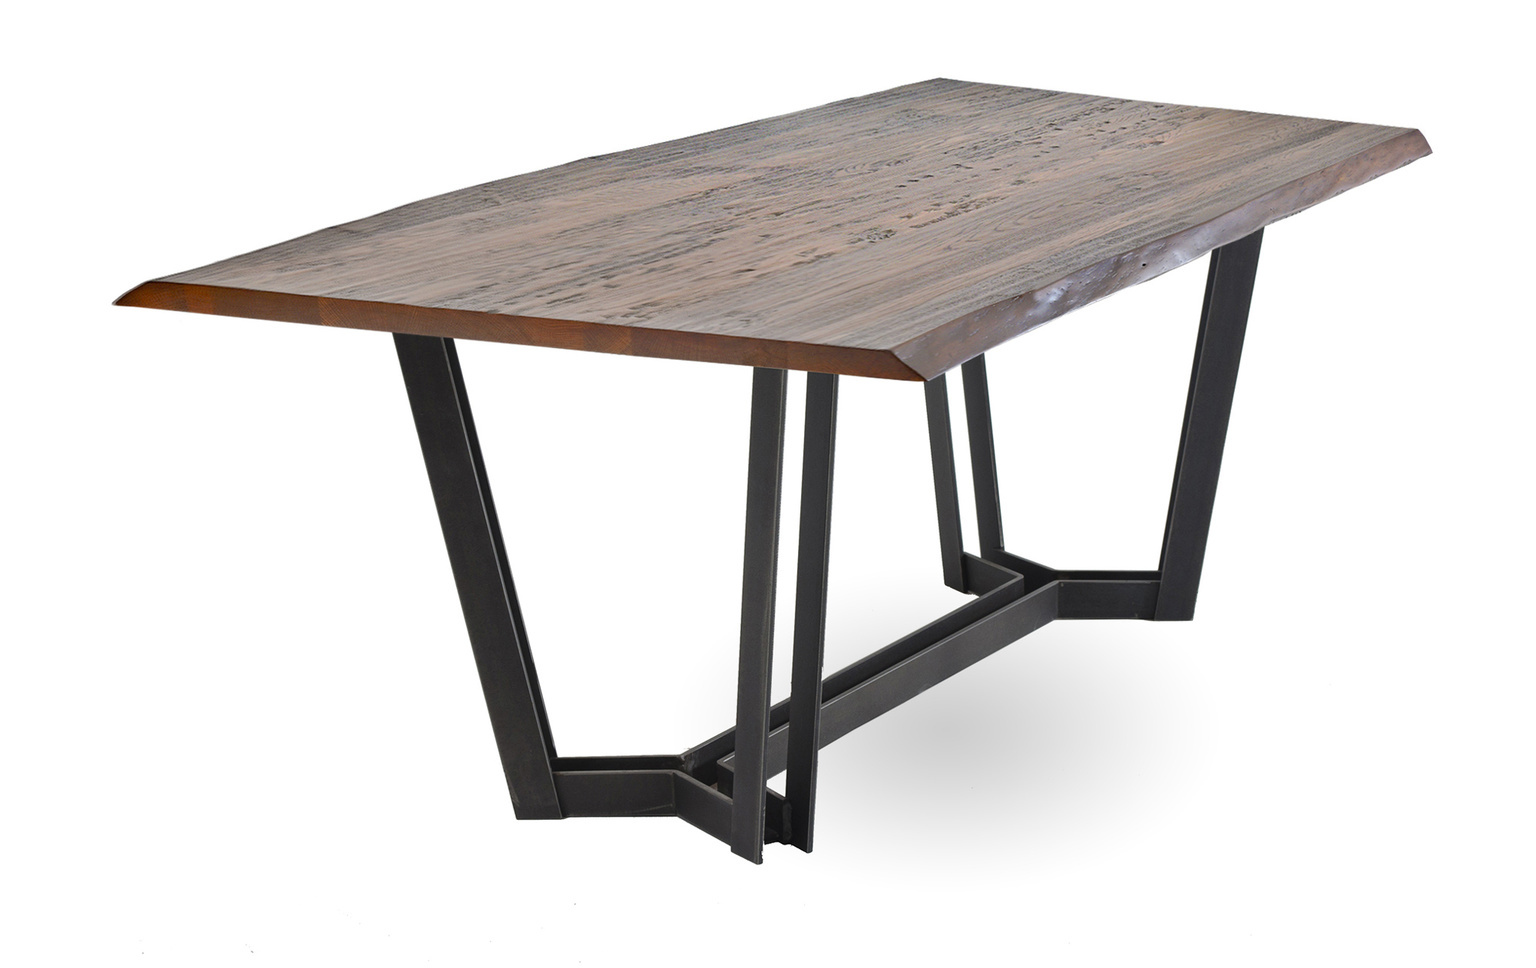 charleston forge dining room tables